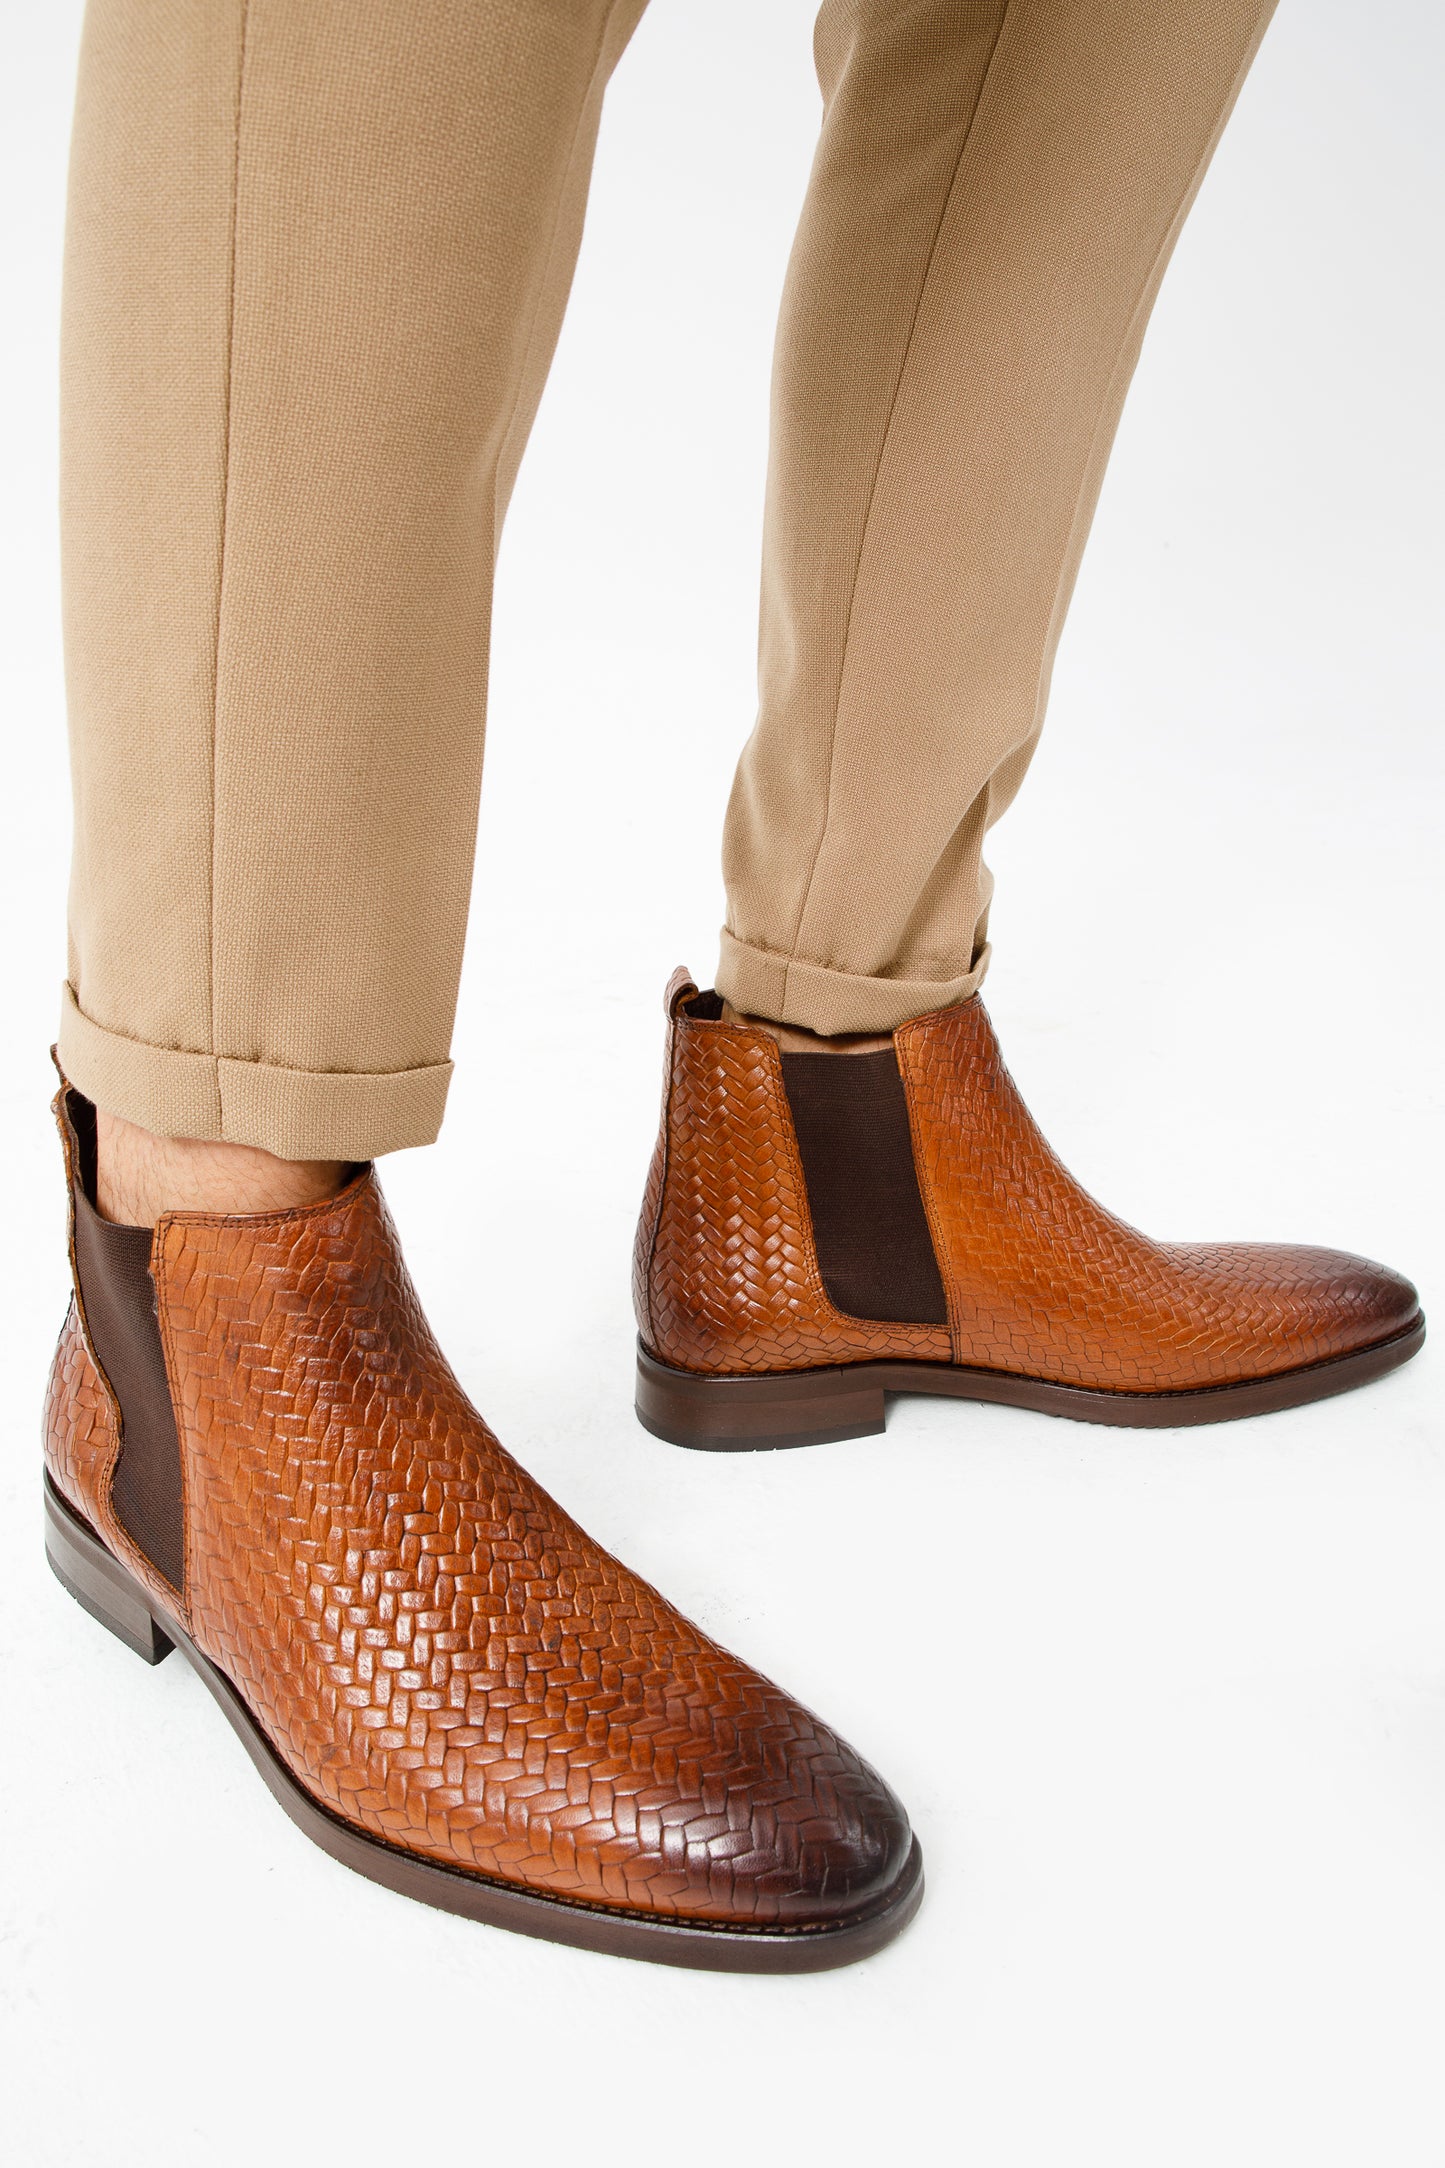 The Oslo Tan Leather Chelsea Men Boot